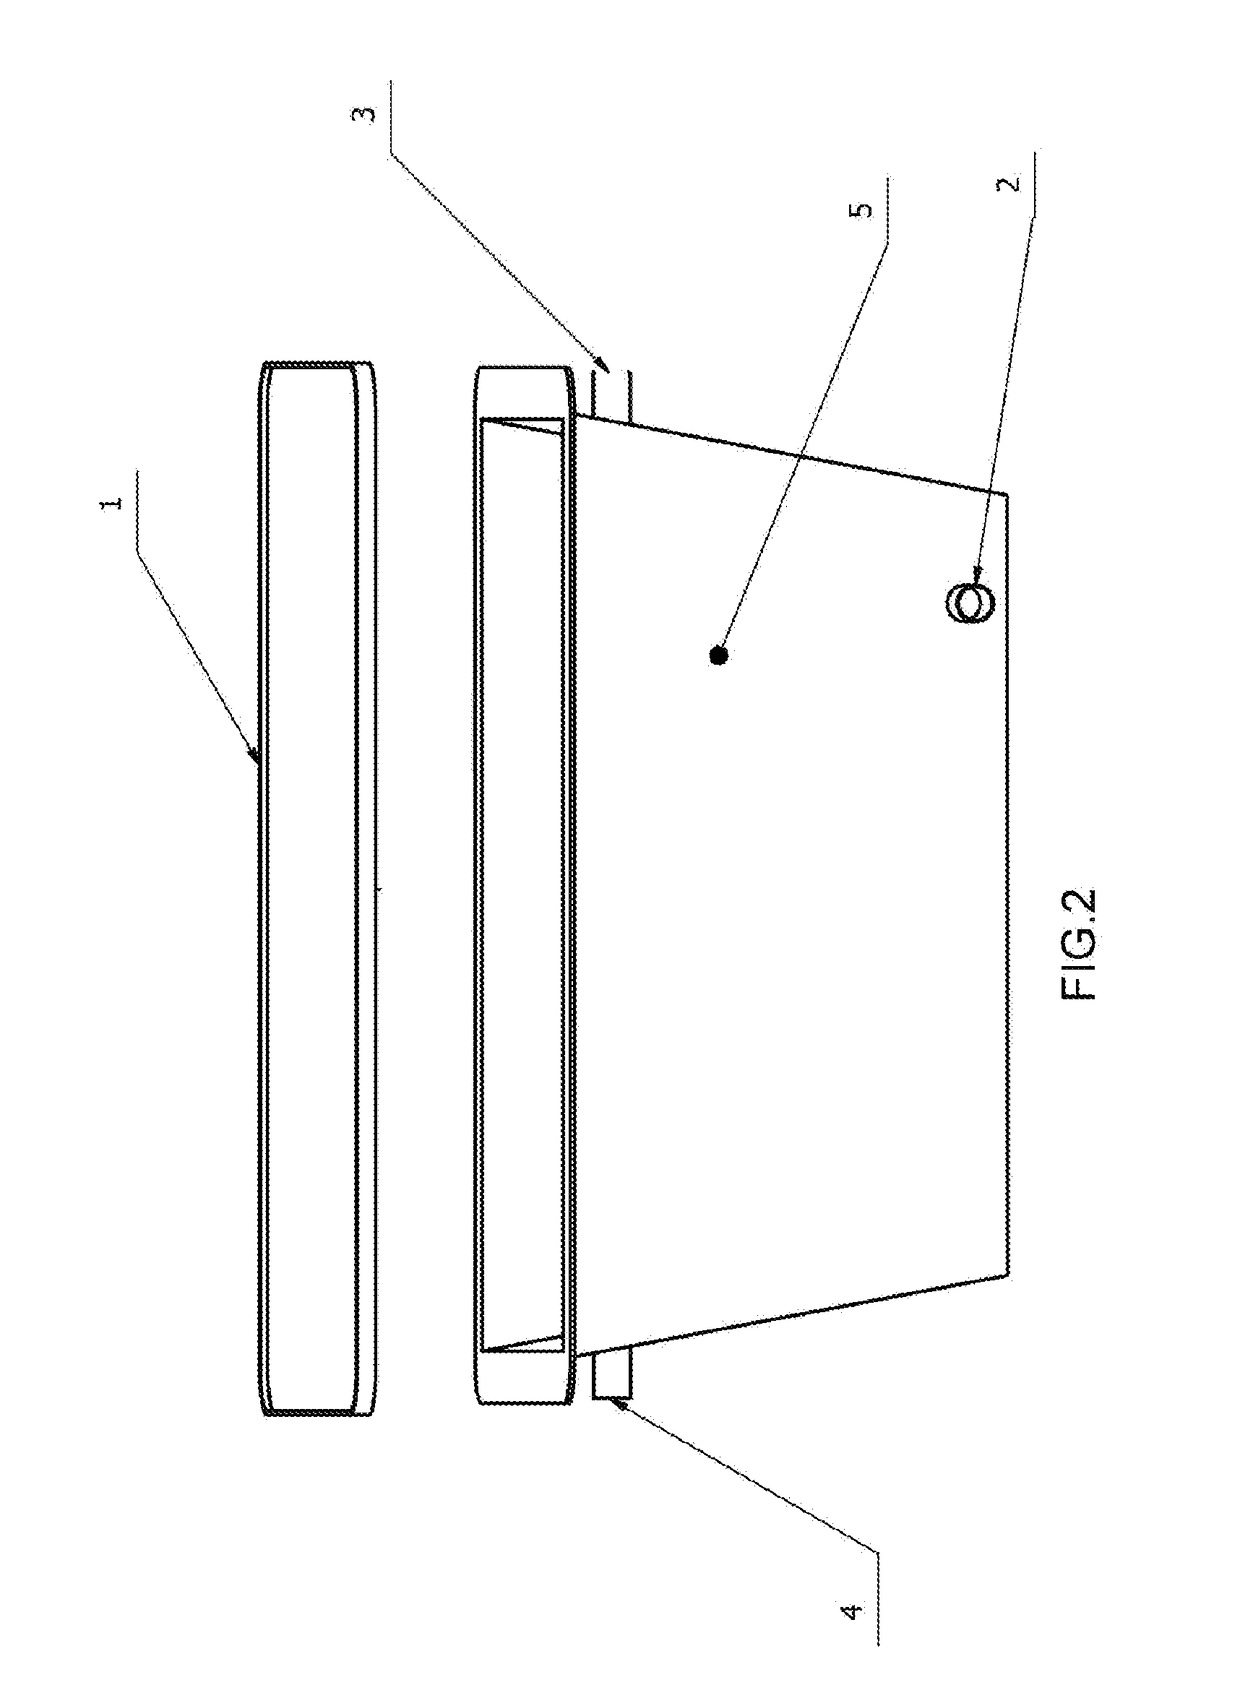 Rainwater Collection and Reuse System (RCRS) and Method